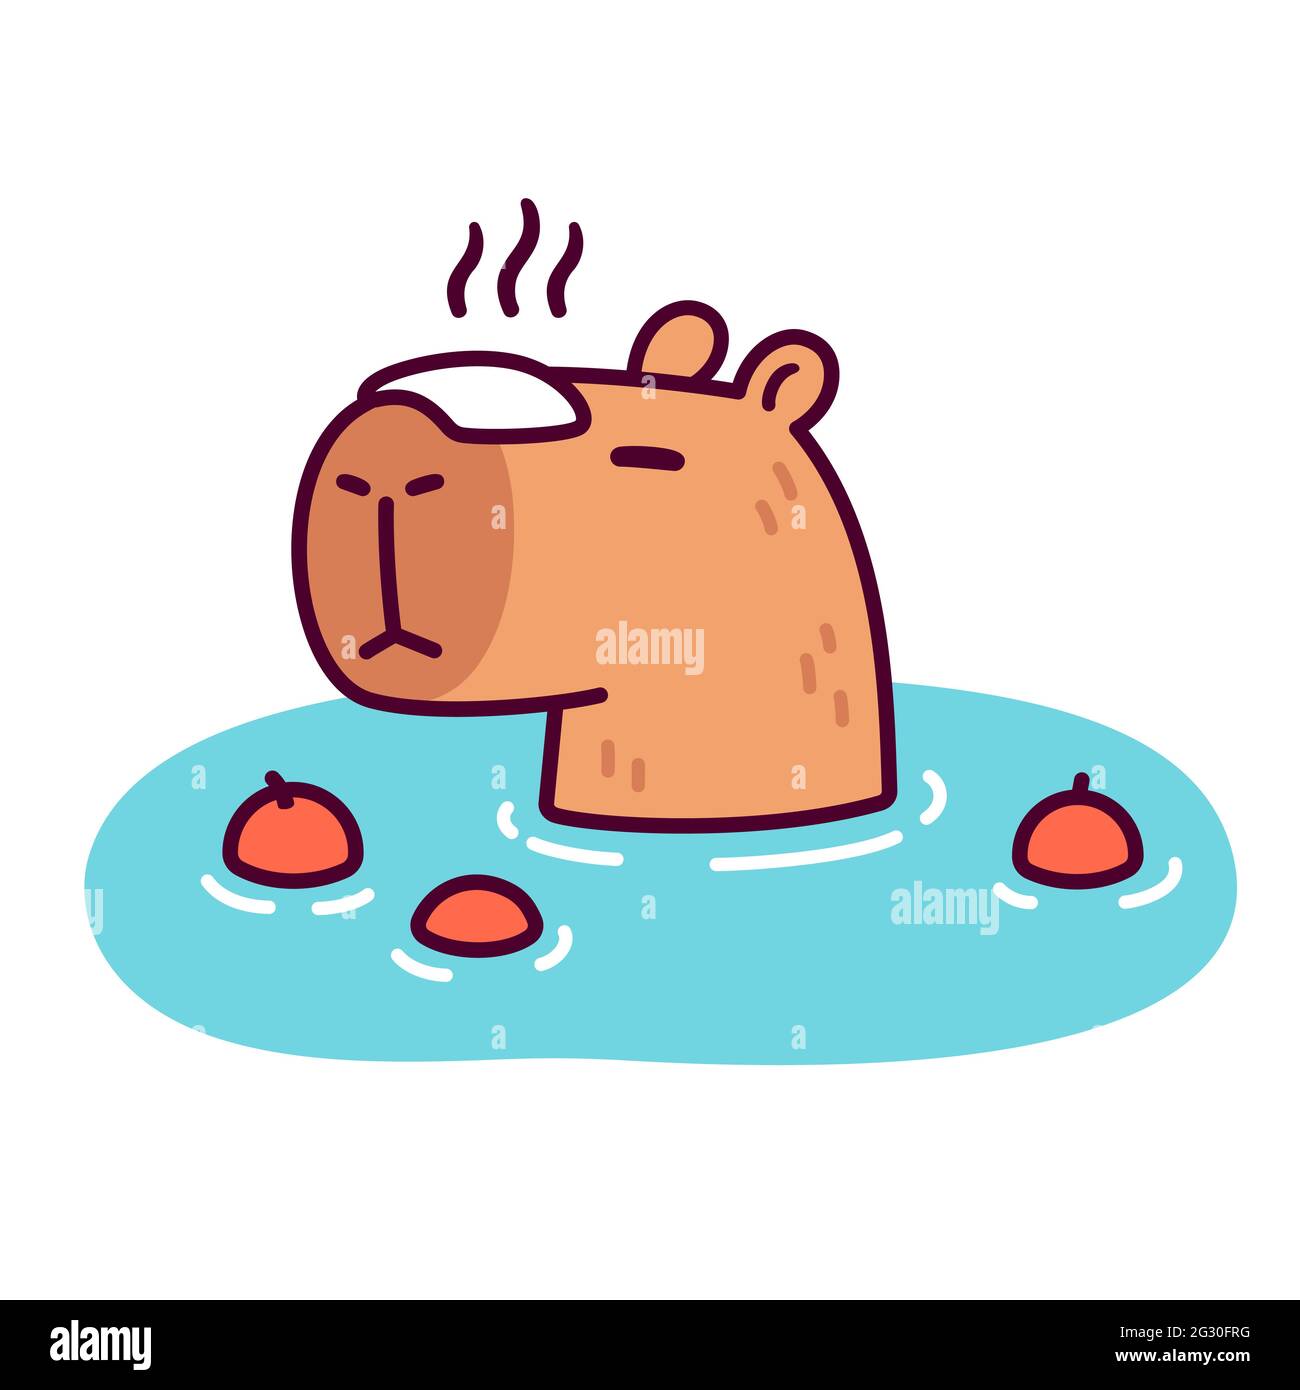 Capybara Phone Wallpaper  Pudgypeachcats Kofi Shop  Kofi  Where  creators get support from fans through donations memberships shop sales  and more The original Buy Me a Coffee Page